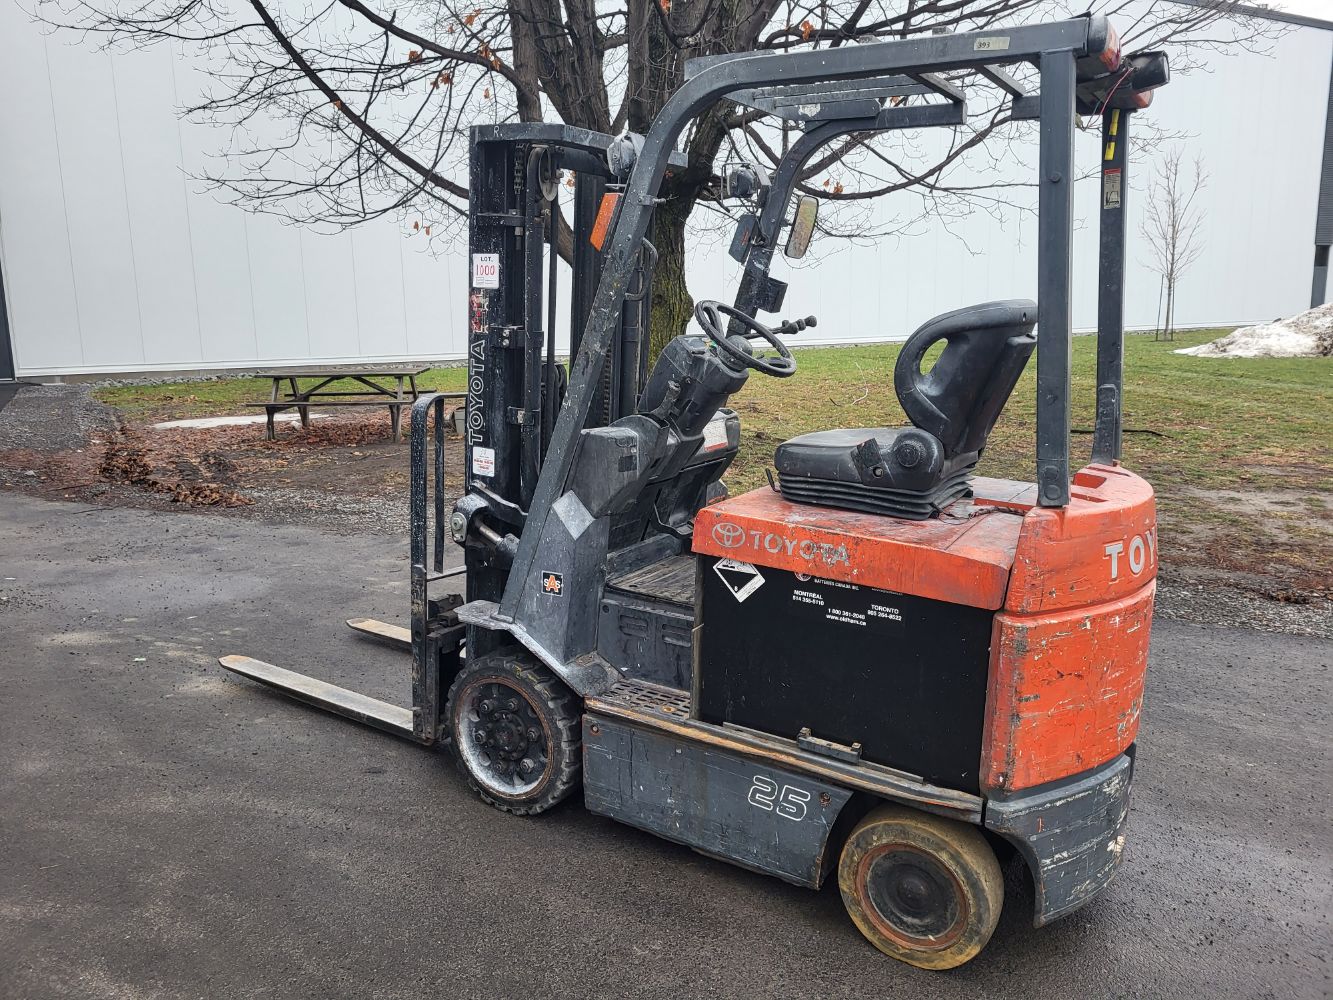 Top Quality Equipment: Forklifts, Industrial Painting, Welding Equipment, Power Tools, and More!